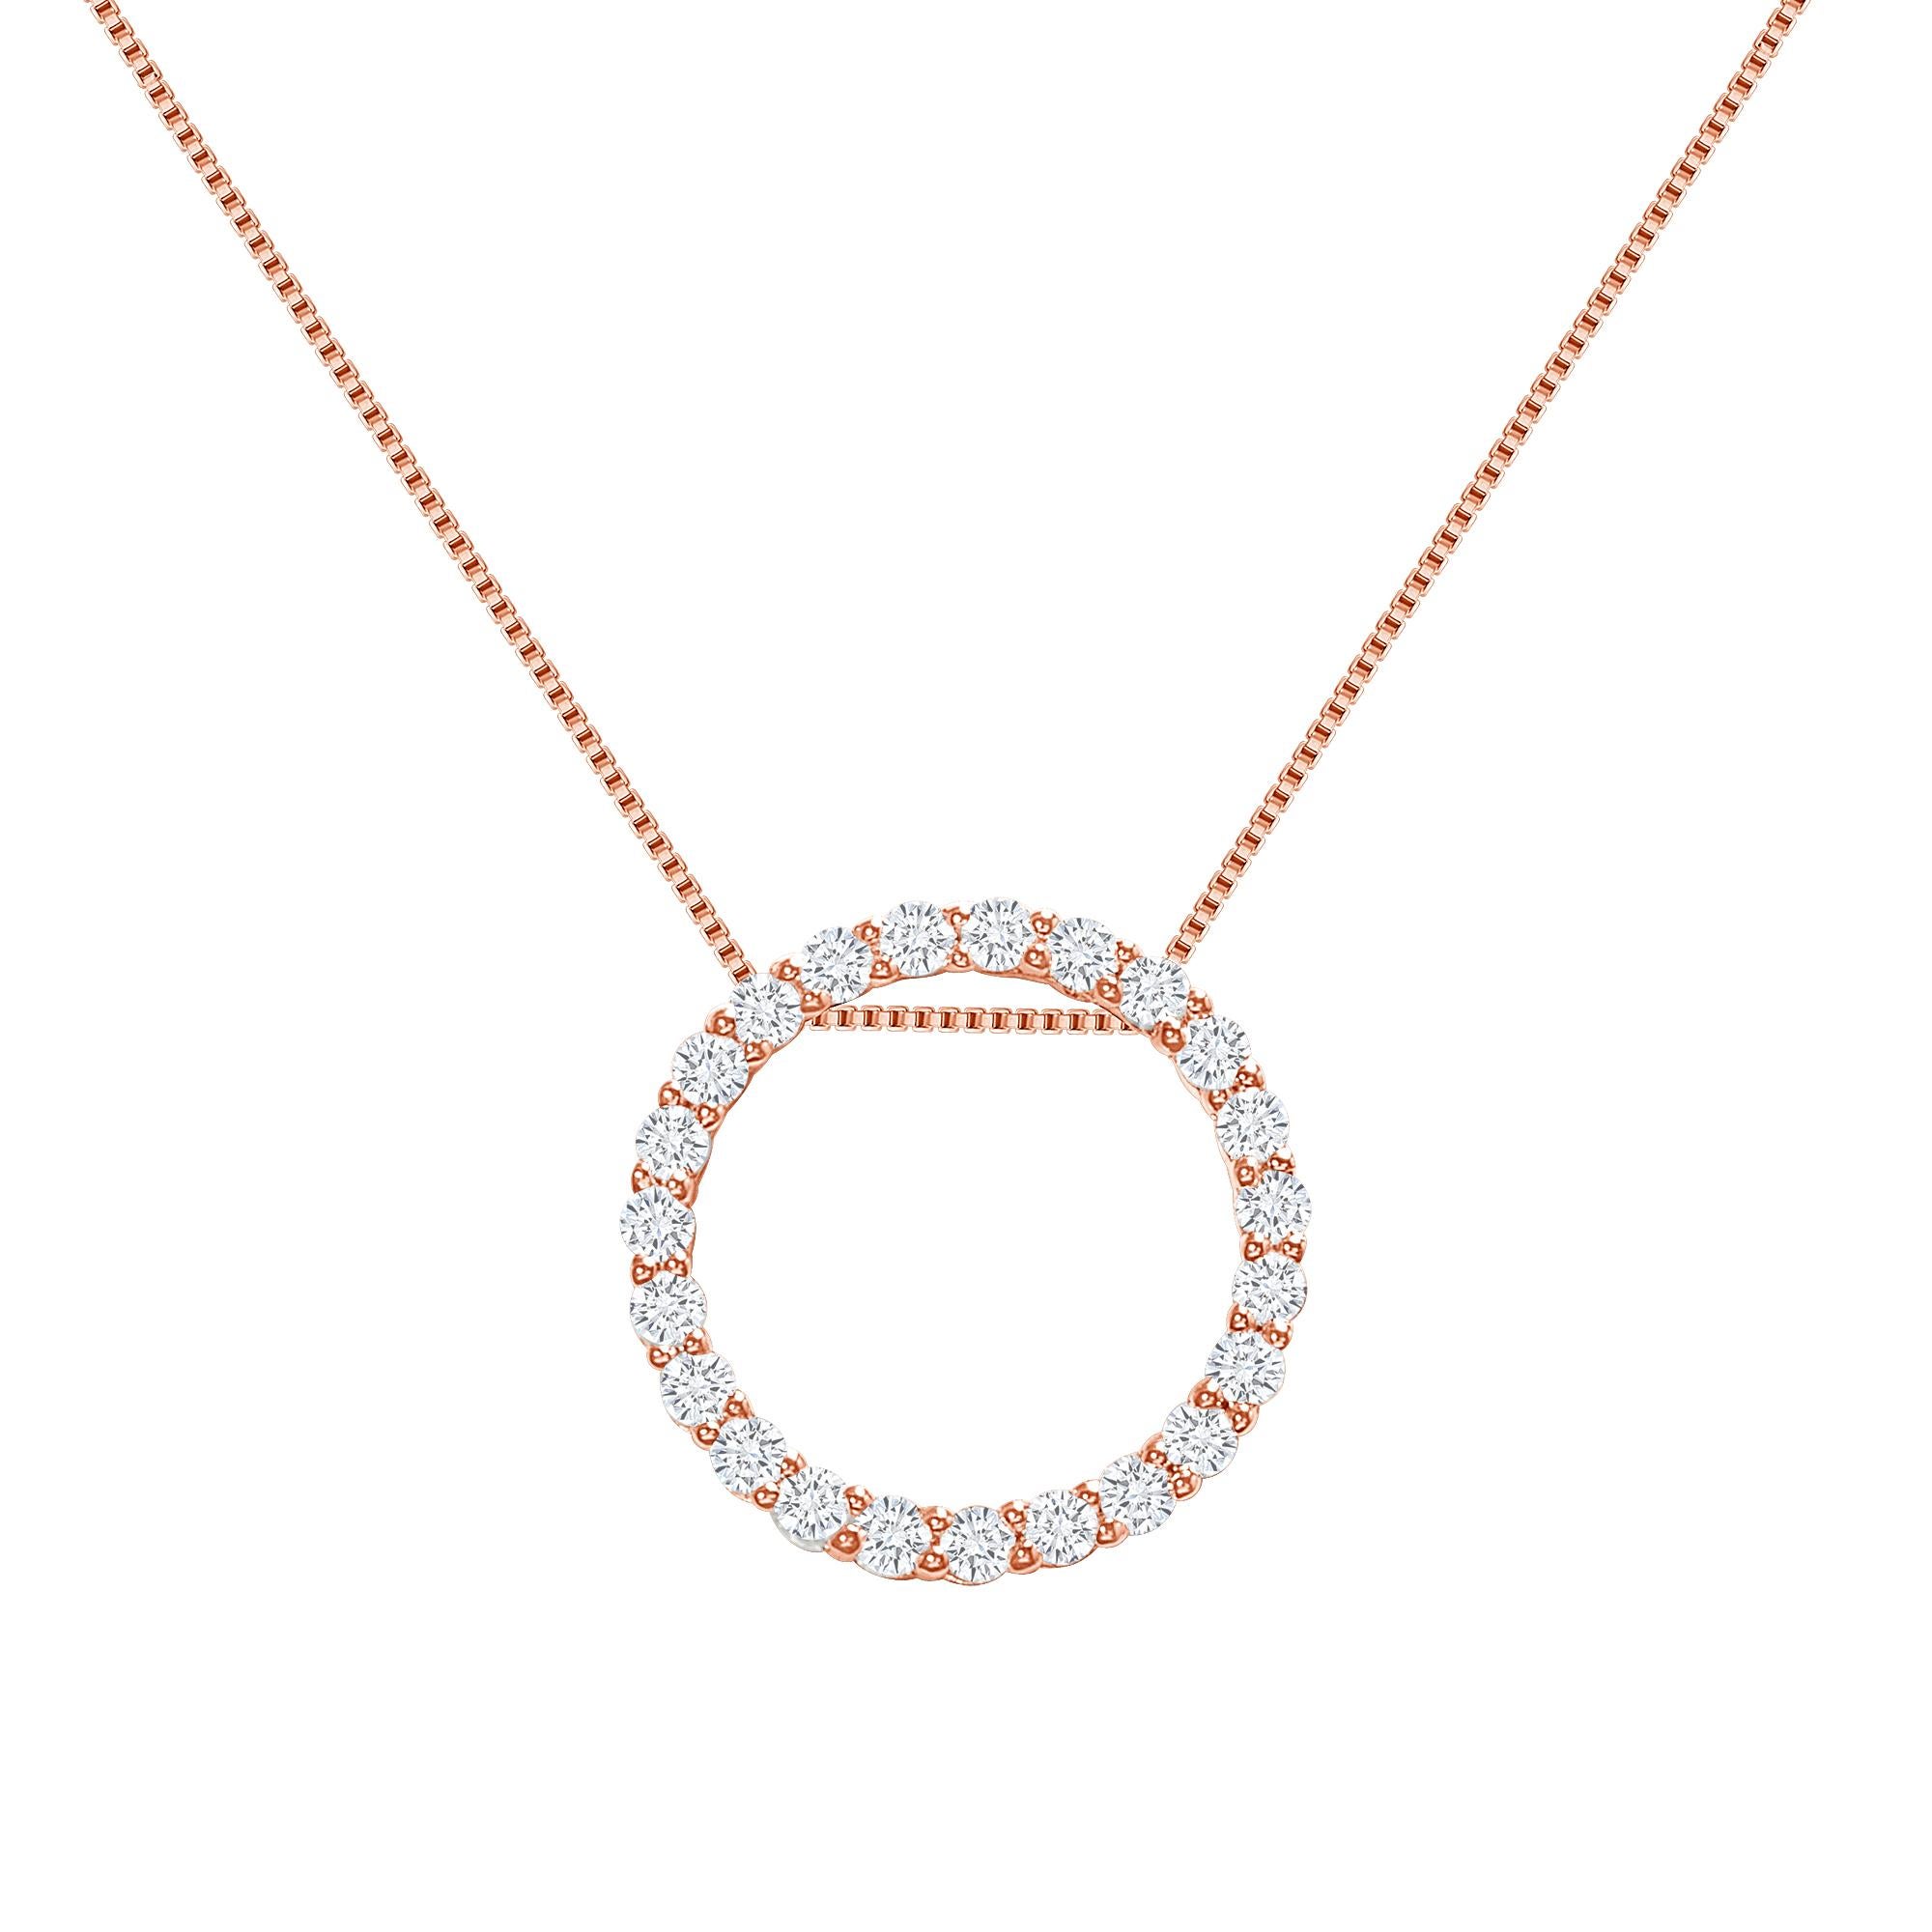 This diamond circle pendant provides a glowing chic look.
Metal: 14k Gold
Diamond Total Carats: 1 carat
Diamond Cut: Round Natural Diamonds (Not Lab Grown)
Diamond Clarity: VS
Diamond Color: F-G
Color: Rose Gold
Necklace Length: 16 inches